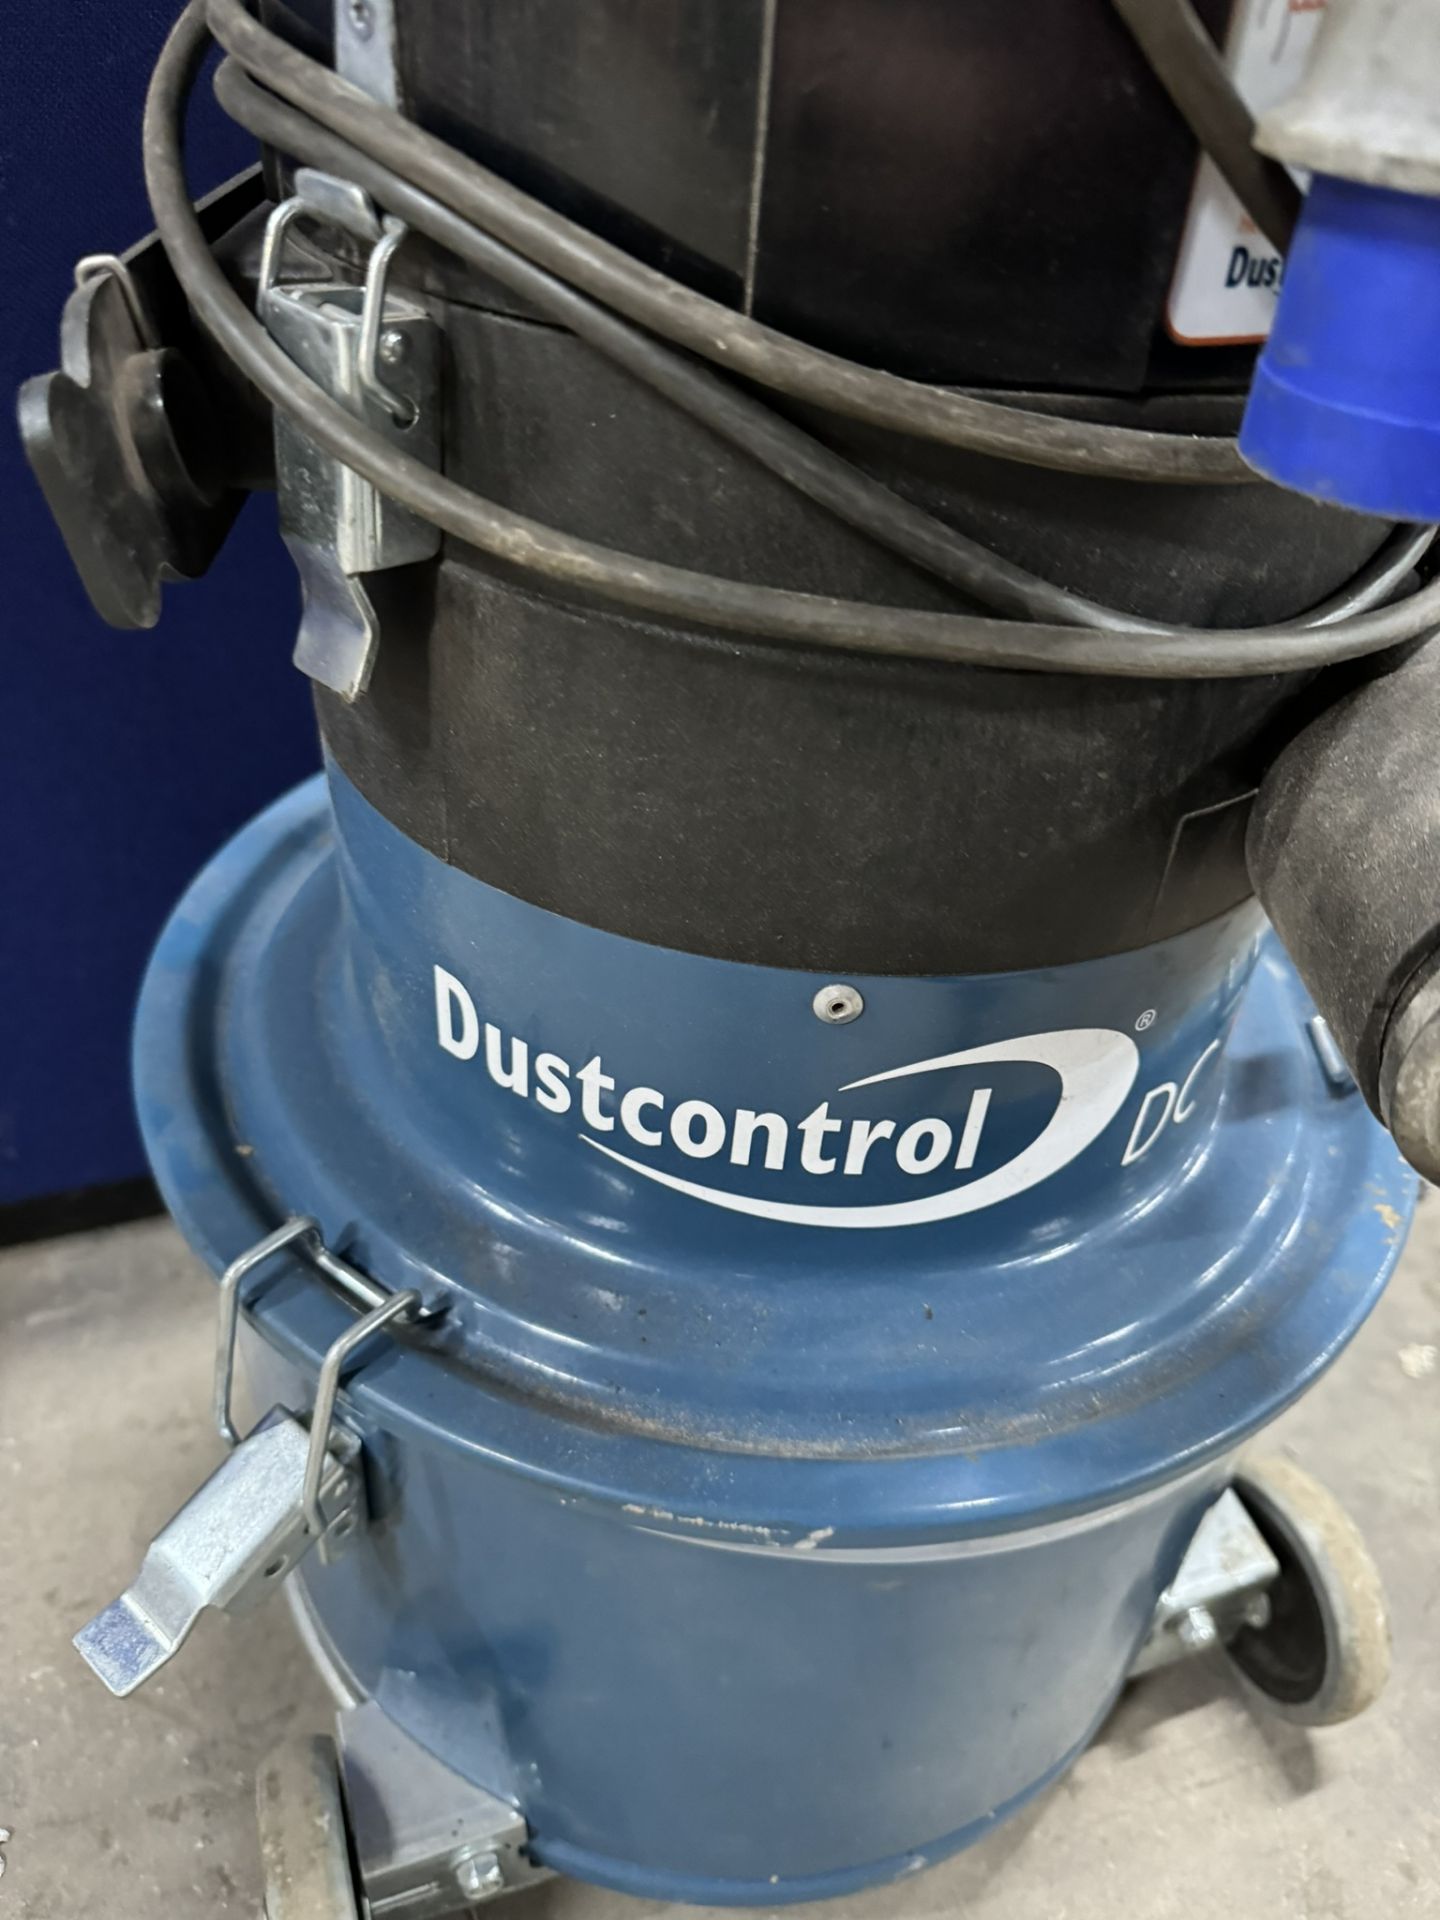 Dust Control DC1800 Mobile Dust Extractor - Image 3 of 6